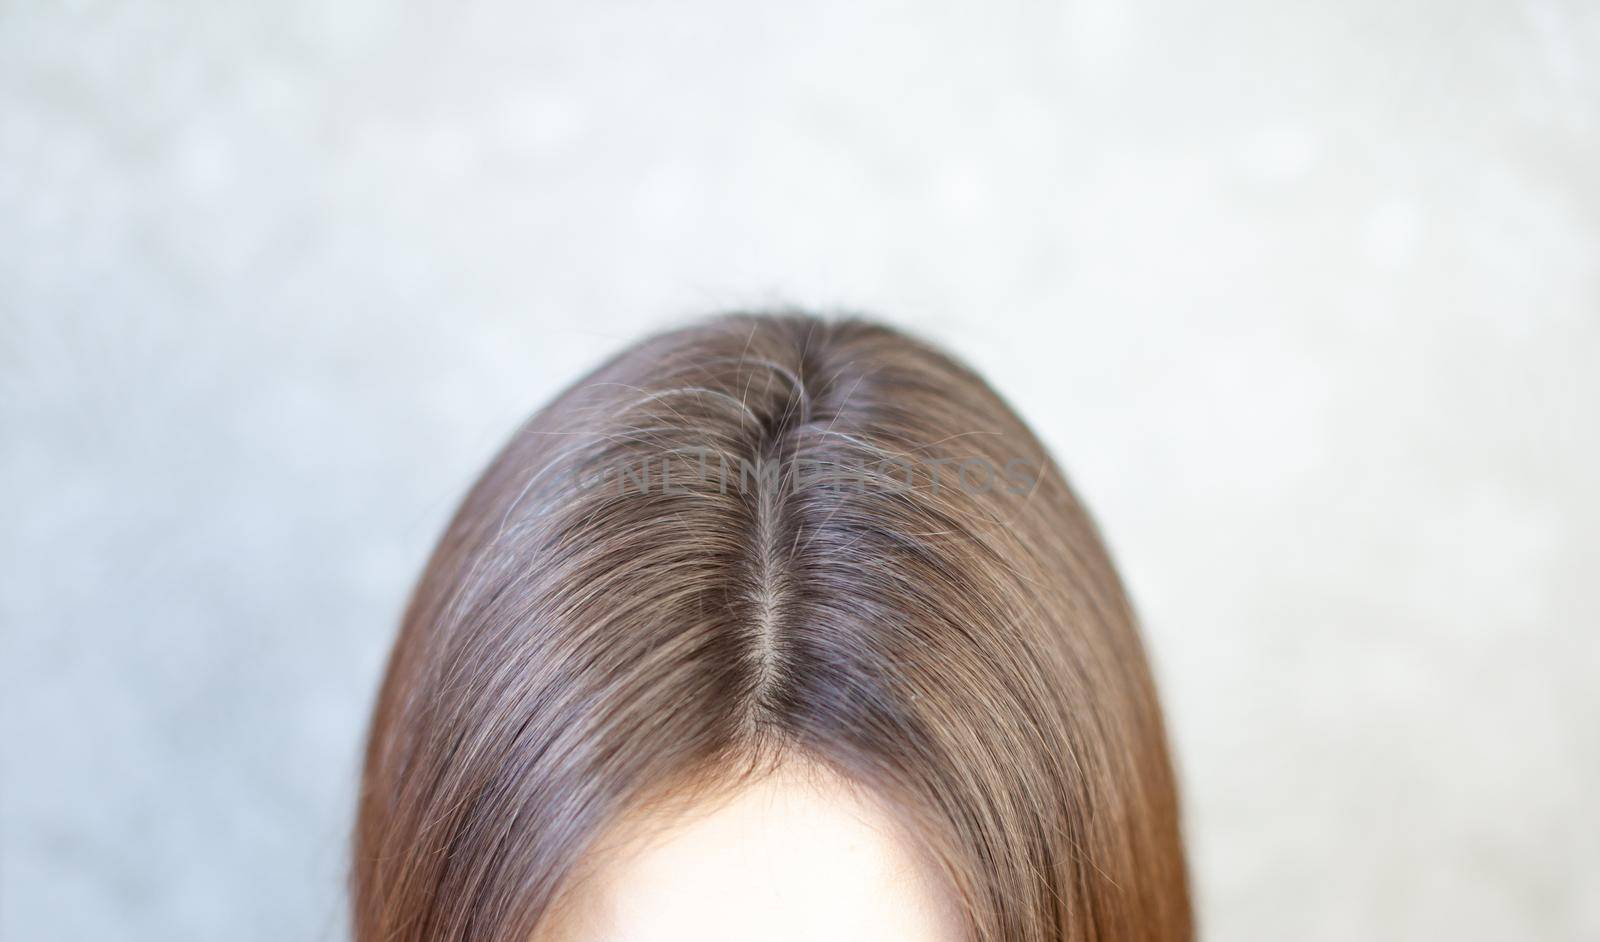 The head of a woman with a parting of gray hair. A woman does her hair. Brown hair on a woman's head close-up.